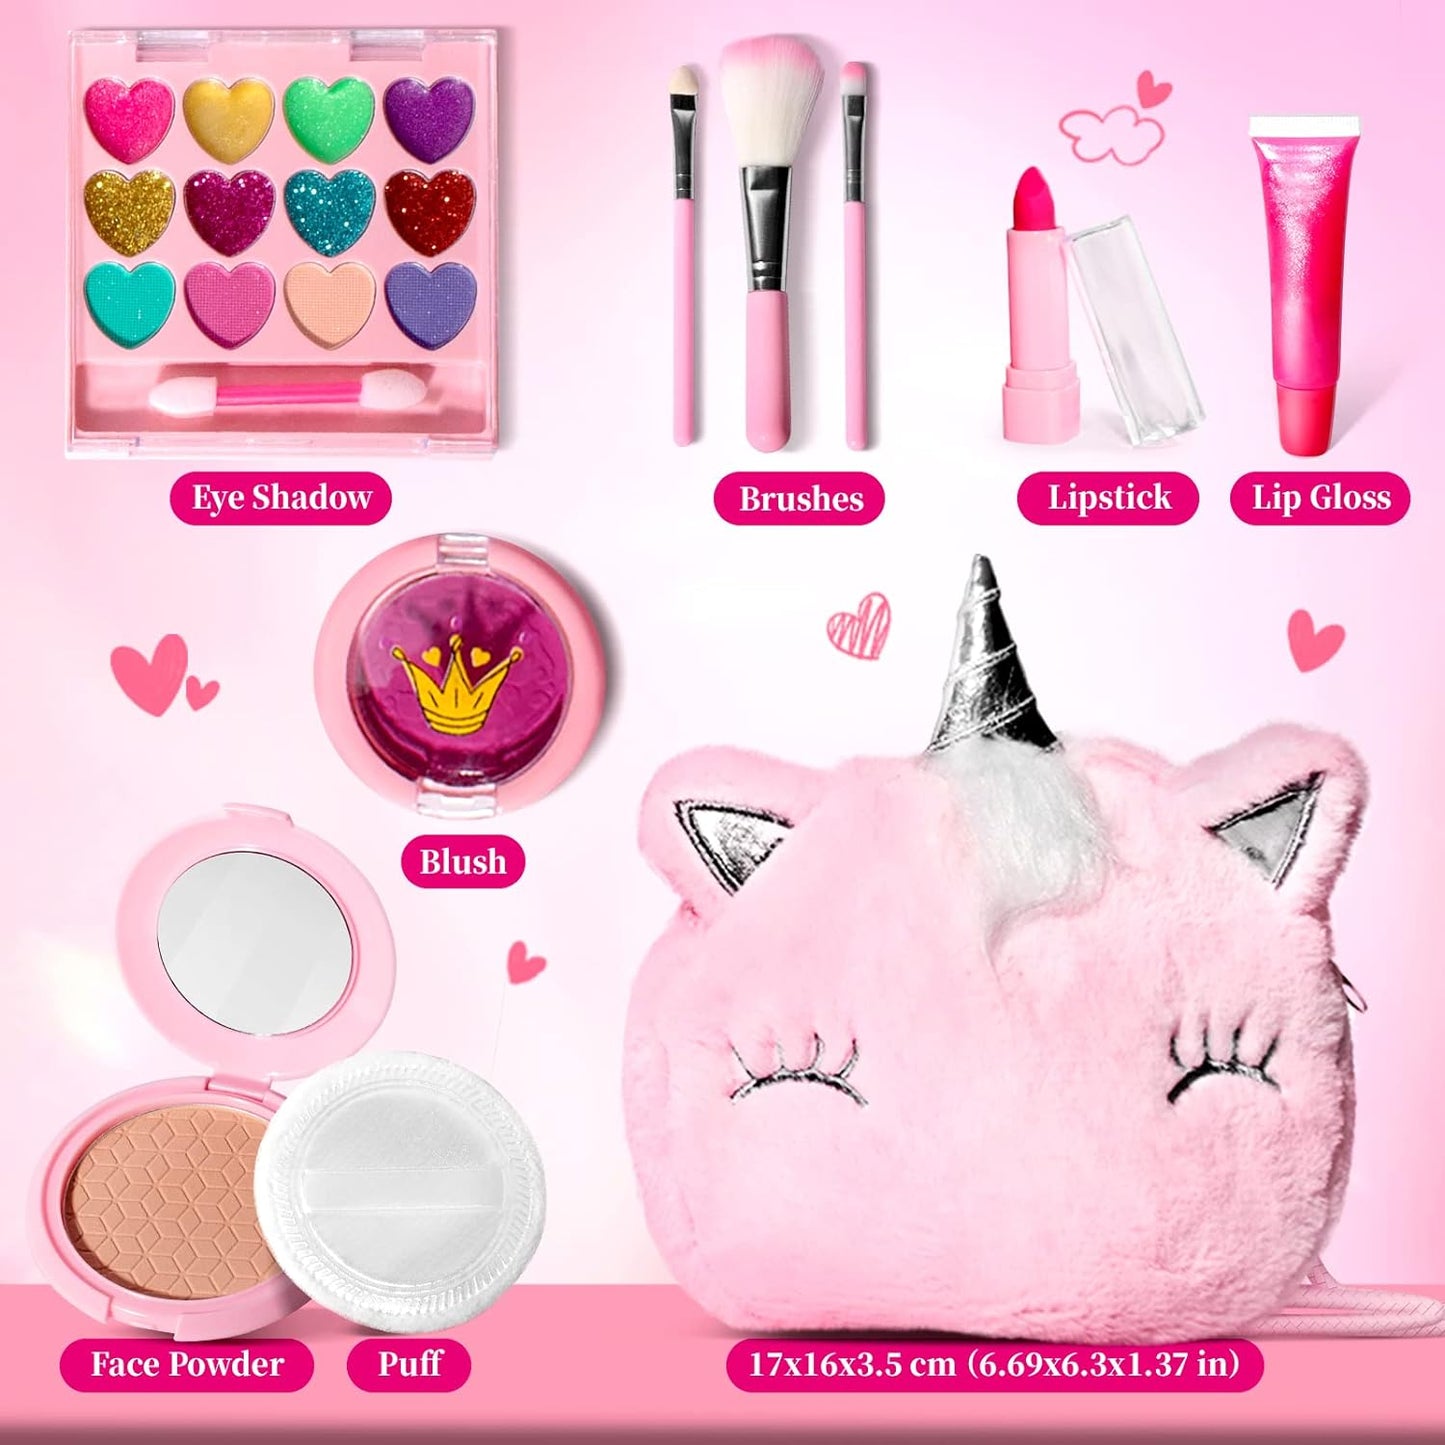 Kids Real Makeup Kit for Little Girls with Unicorn Bag - Real, Non Toxic, Washable Make Up Toy - Unicorn Toys Gift for 3 4 5 6 7 8 9 10 12 Years Old Girls Birthday